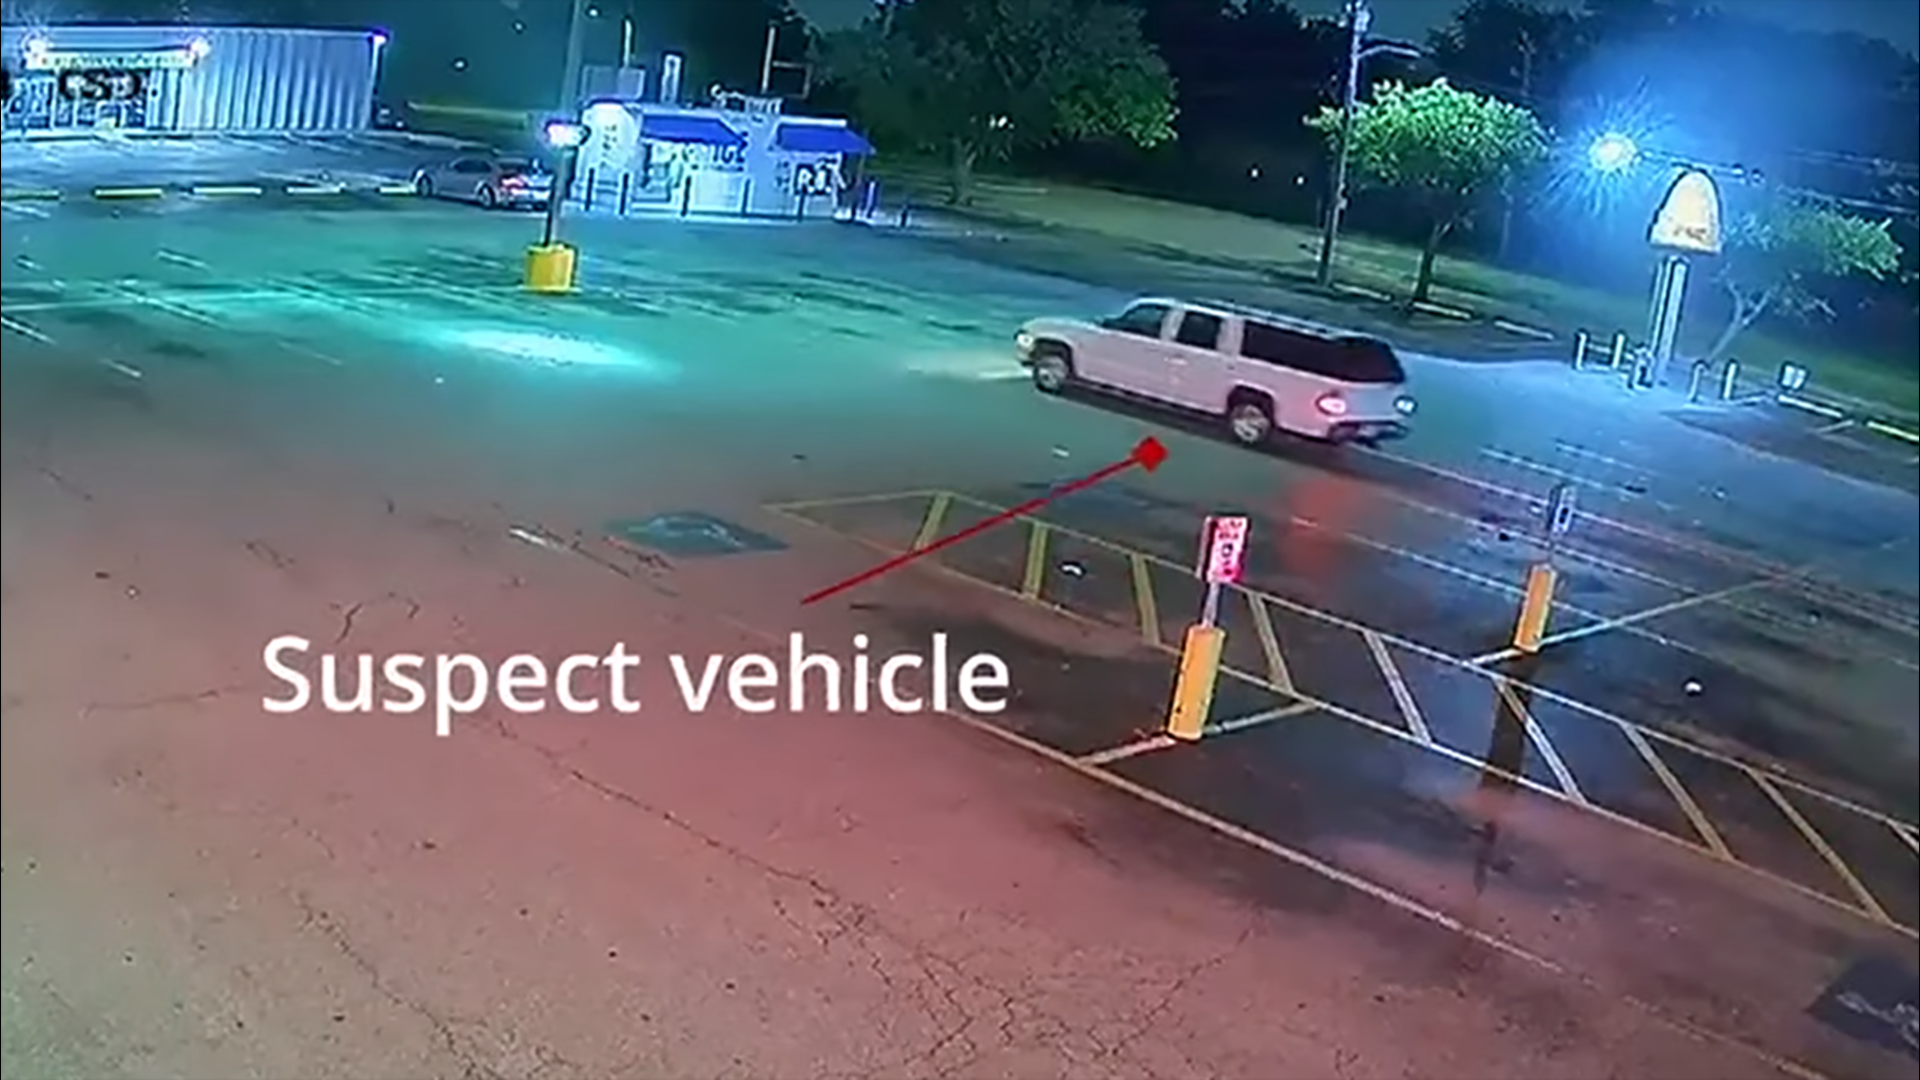 Houston police have released surveillance video in the fatal shooting of a woman outside of a gym in southeast Houston.